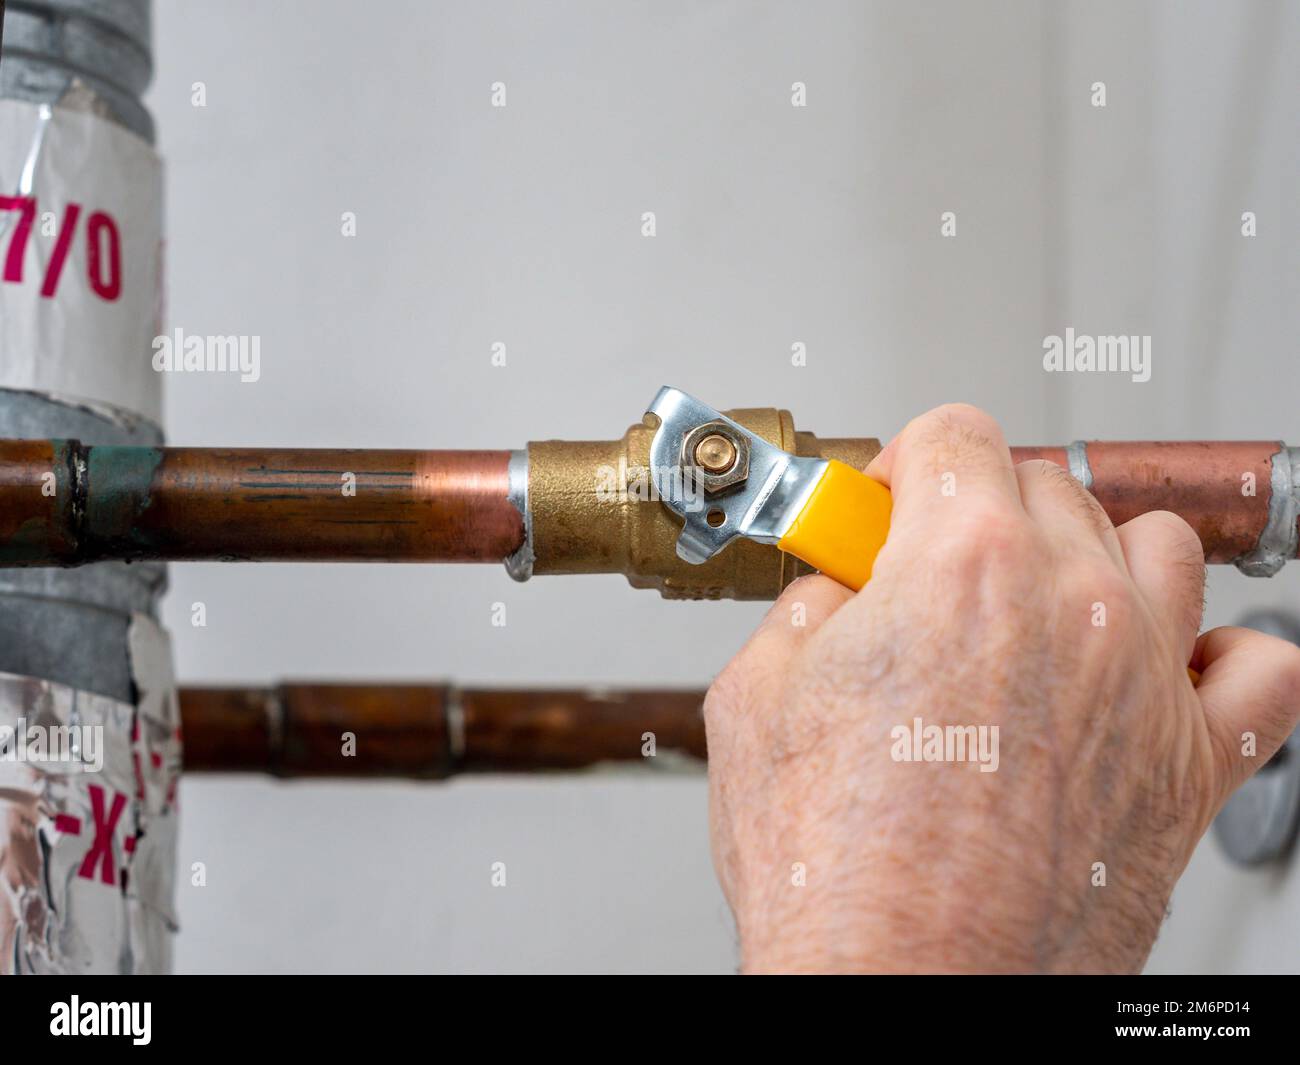 Plumber turning water shut off valve. Copper plumbing pipe with brass water supply valve and yellow stopcock handle. Stock Photo